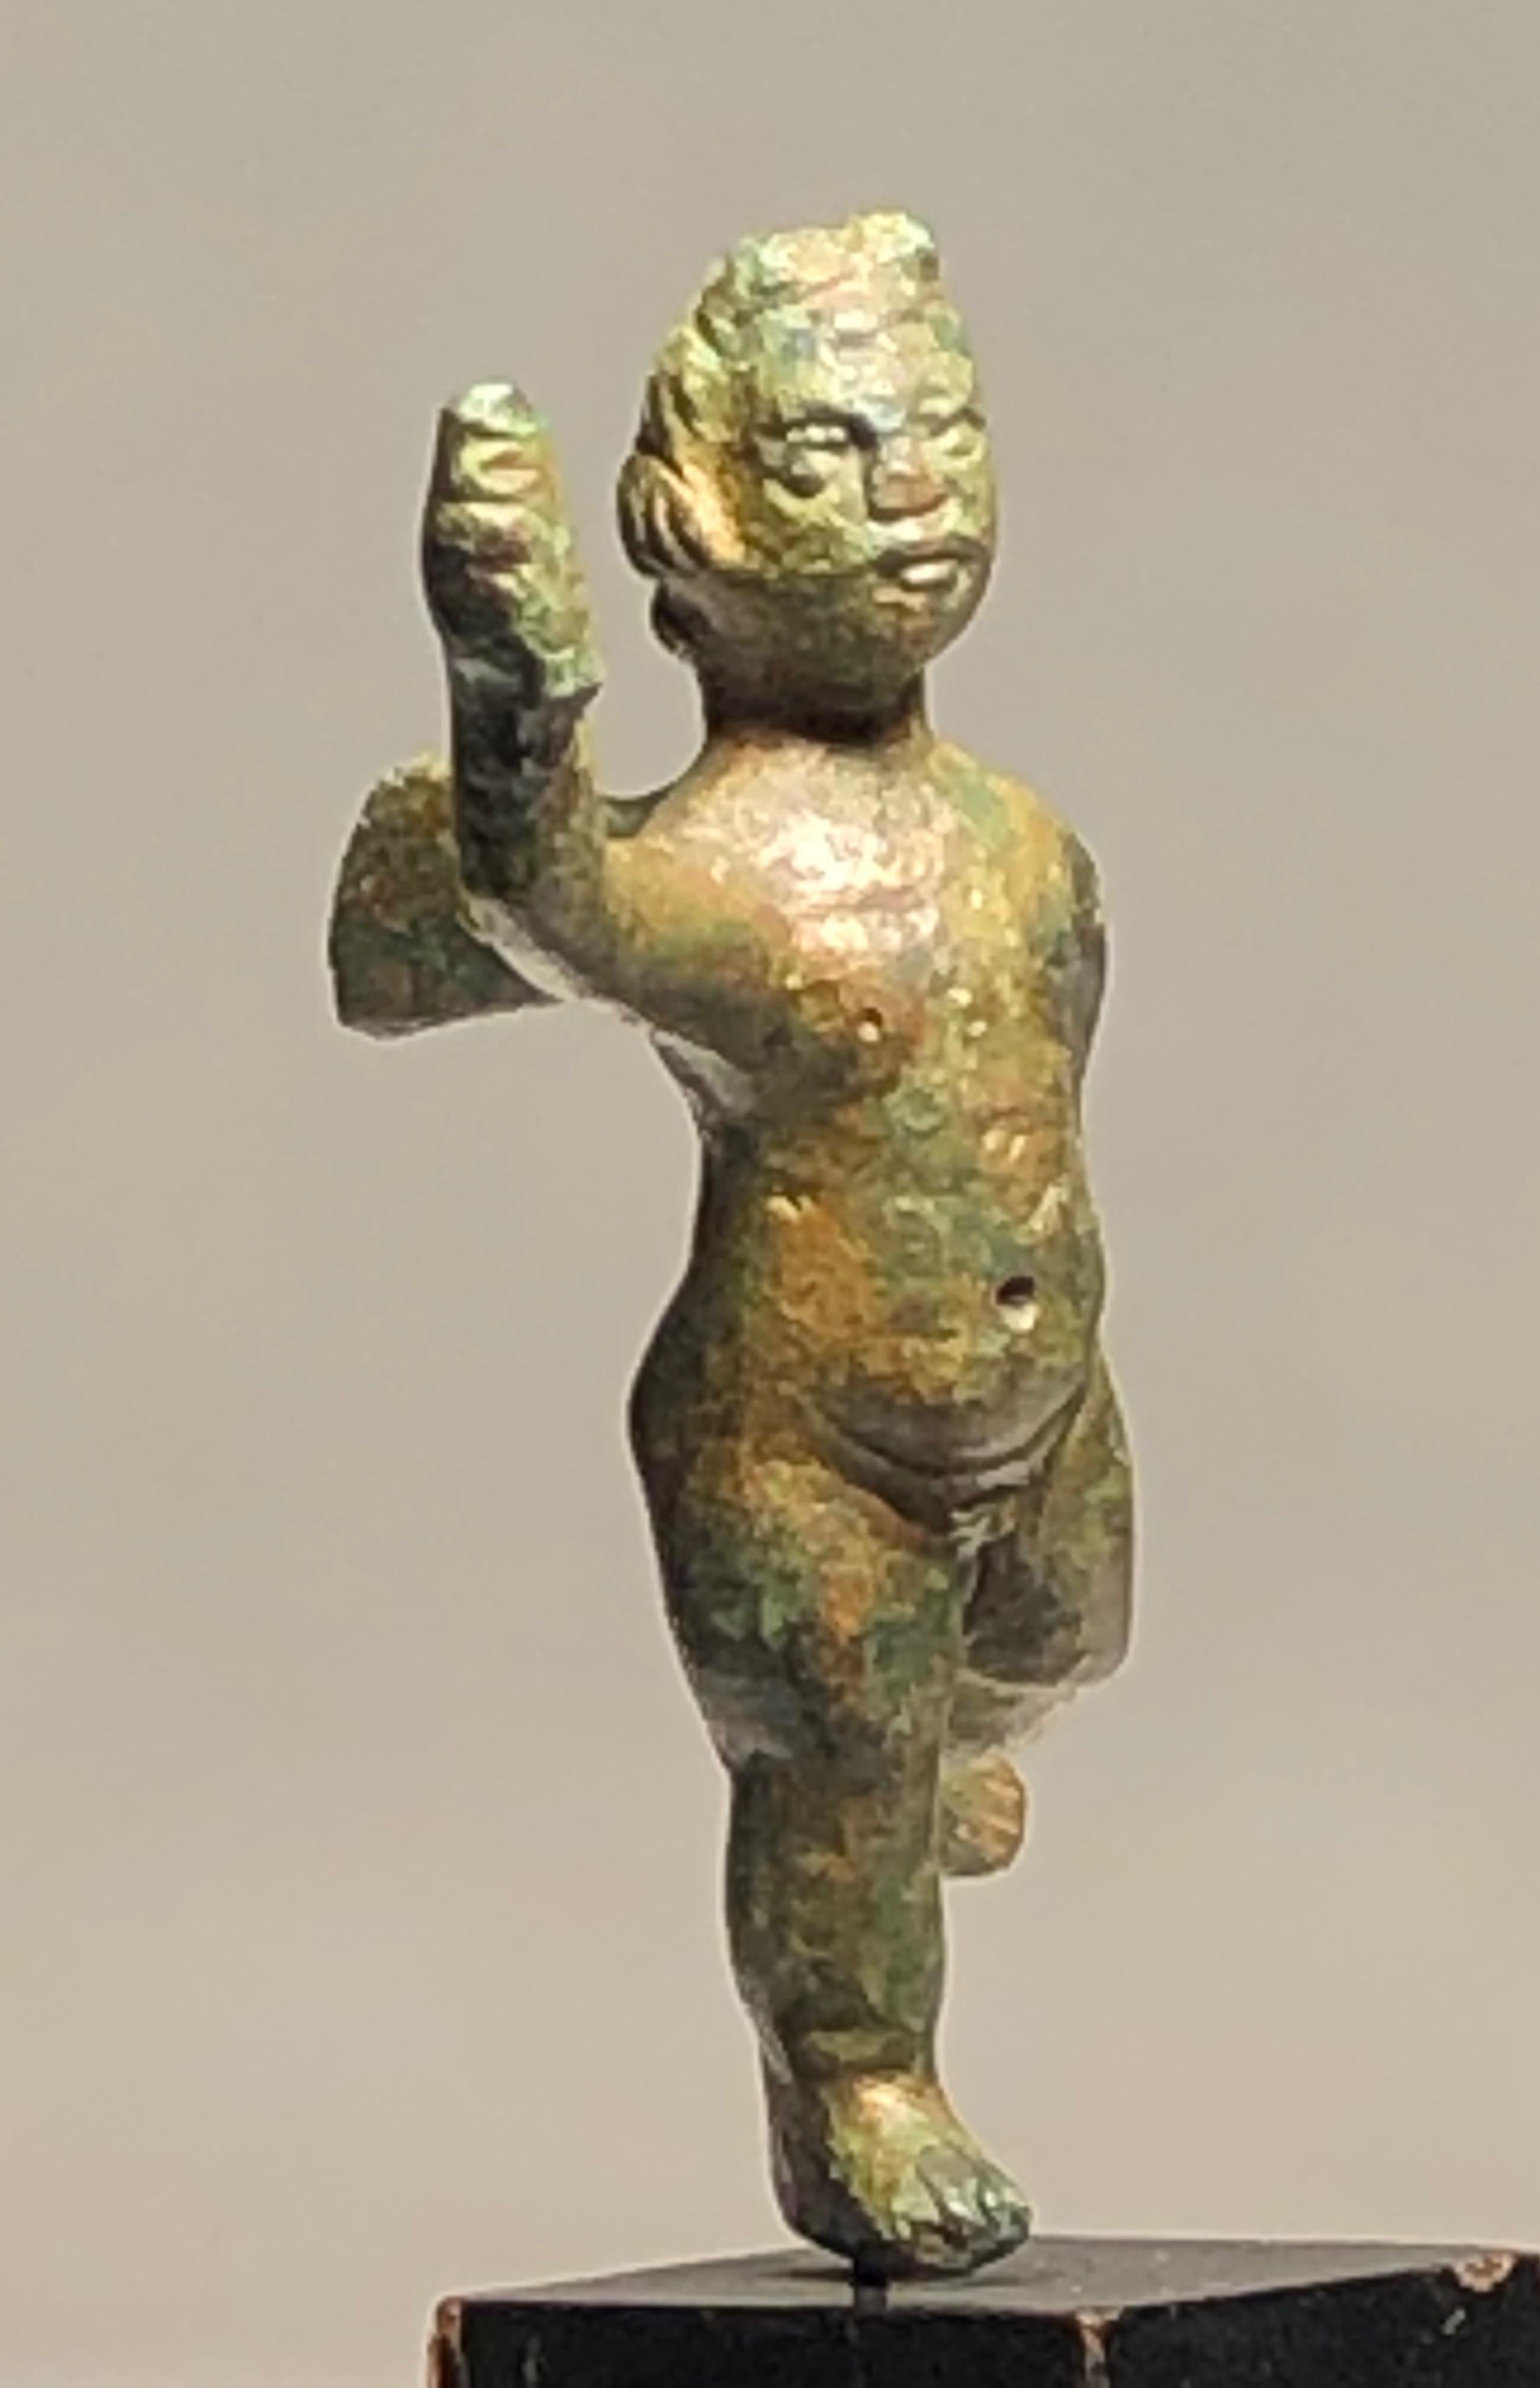 Charming Roman bronze statuette of a young Cupid, the Roman counterpart of Eros in Greek mythology; the young winged god of love and sex. Eros, Son of Aphrodite (Venus) and Ares (Mars) had many siblings with whom he formed groups of winged love